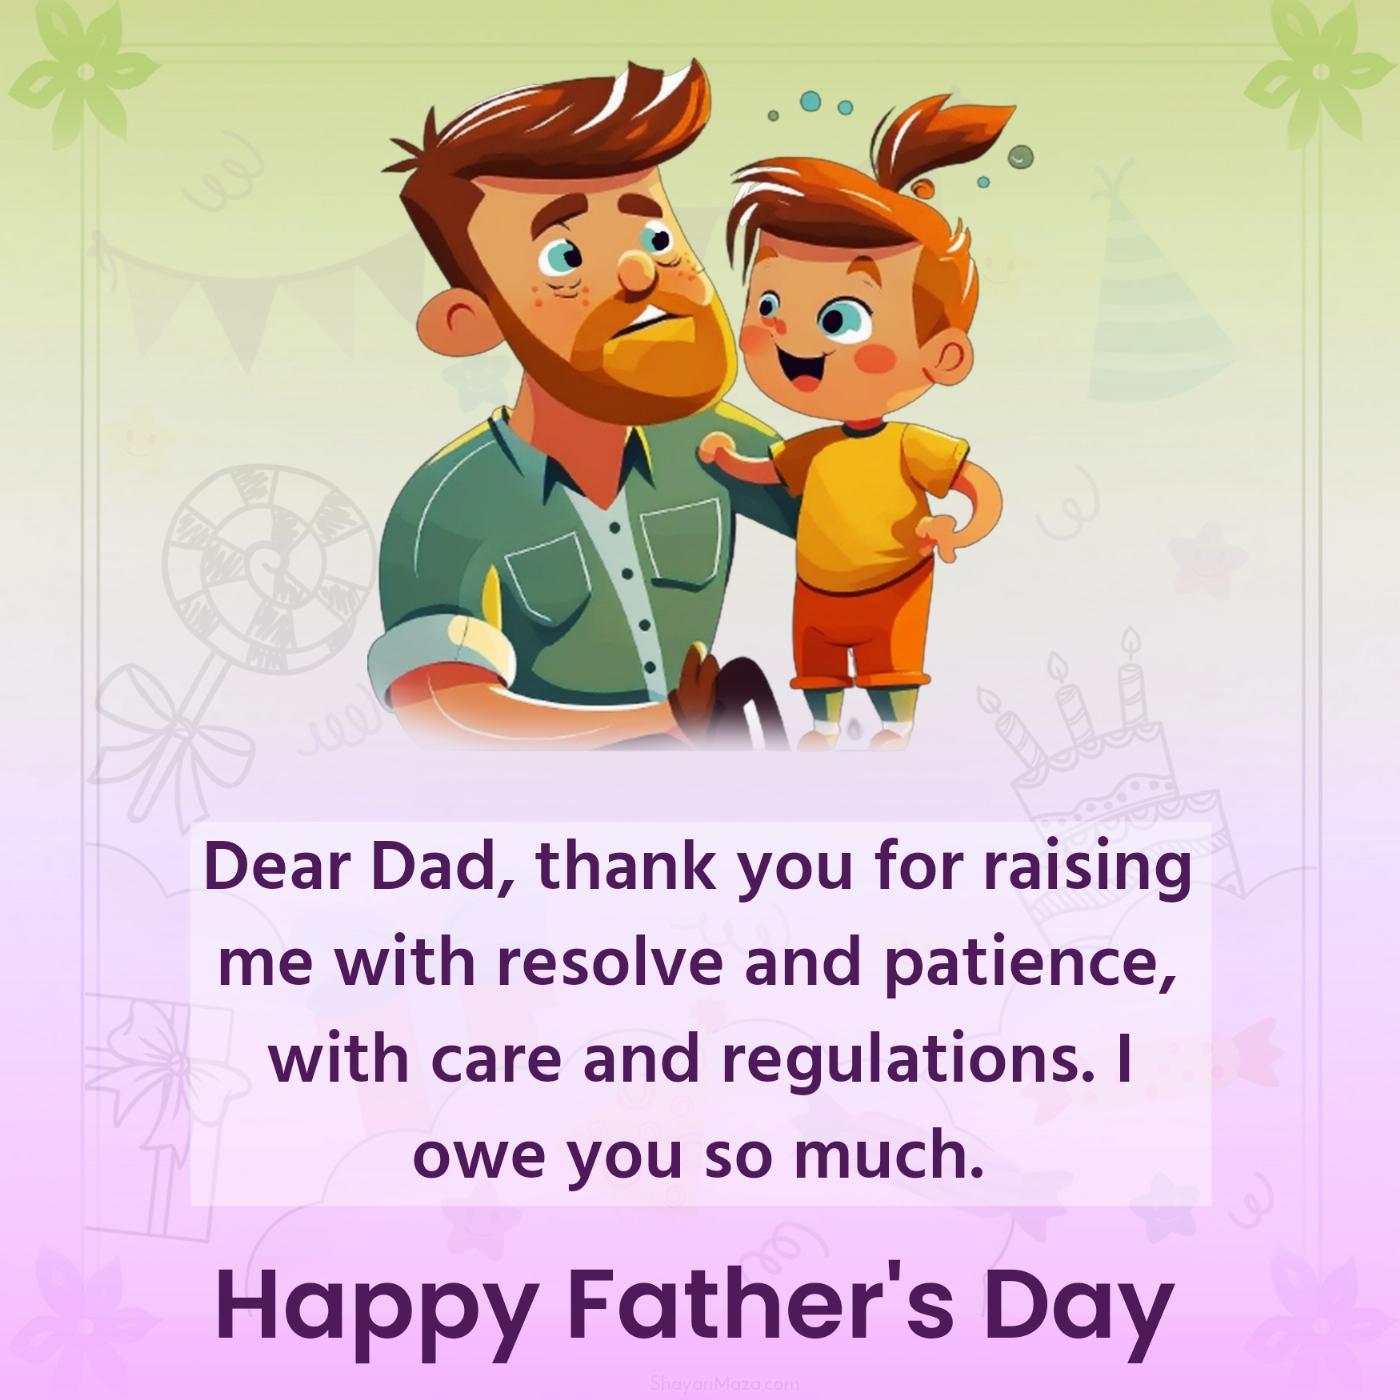 Dear Dad thank you for raising me with resolve and patience